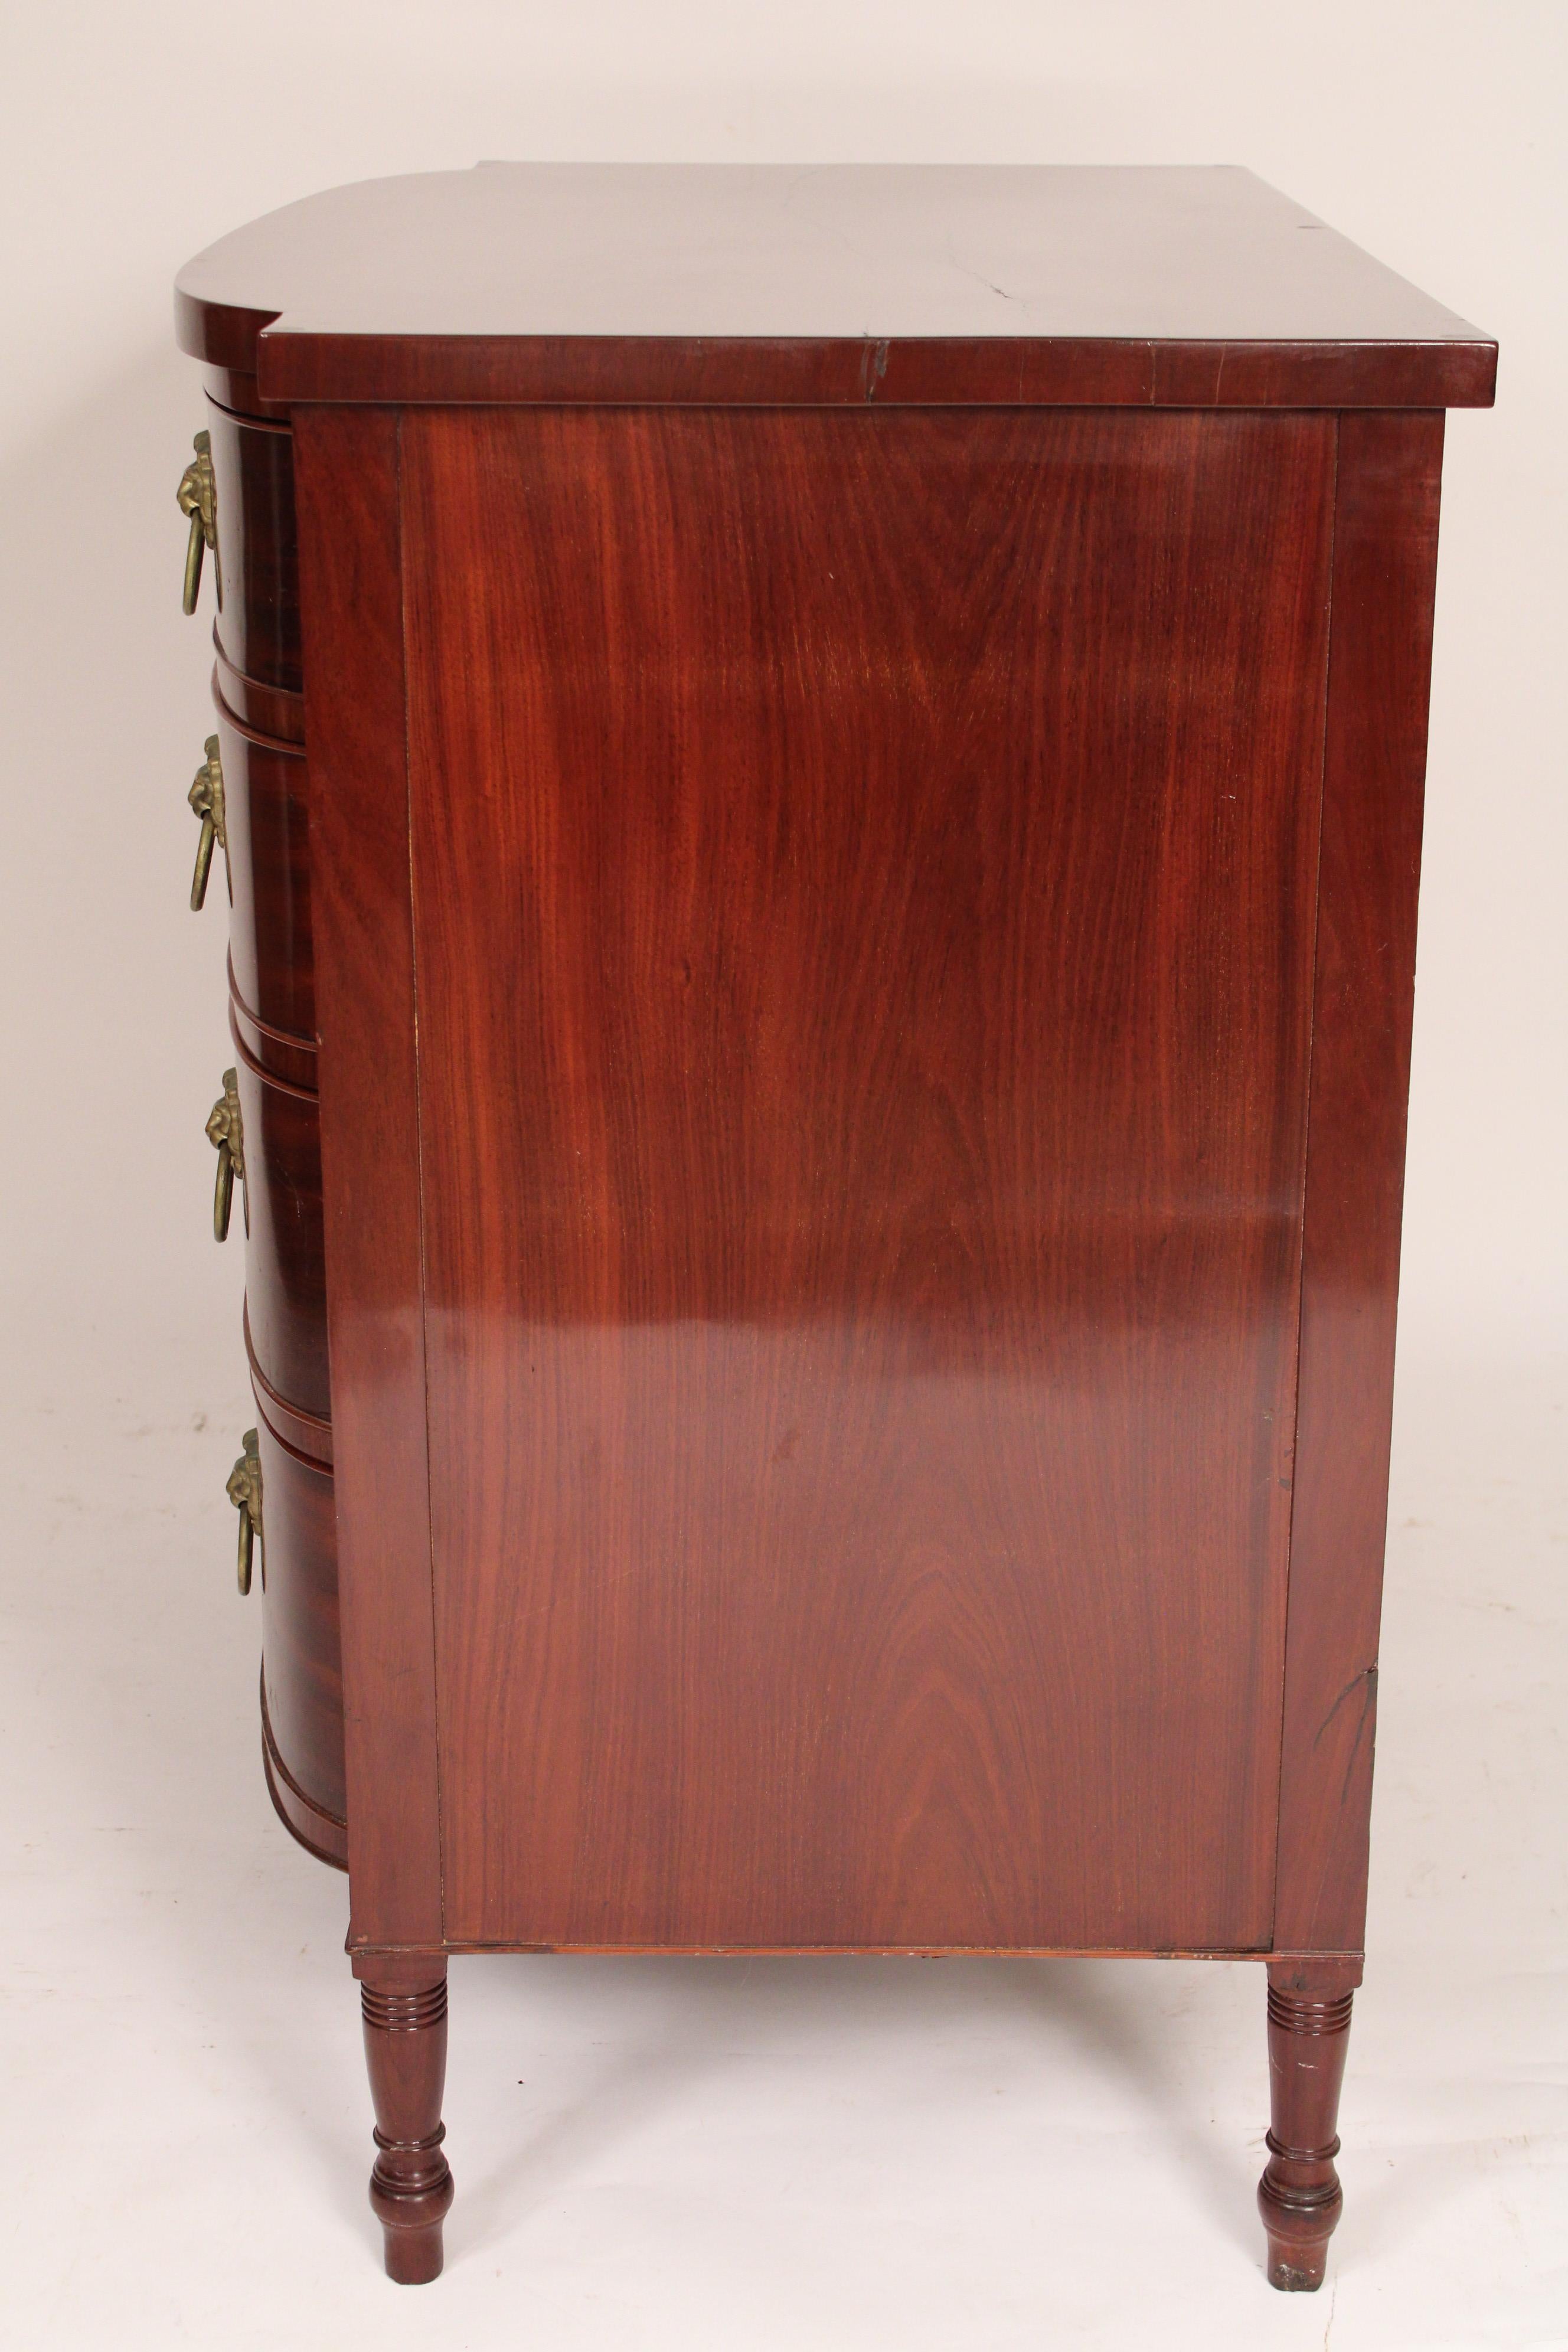 Early 19th Century English Regency Mahogany Chest of Drawers